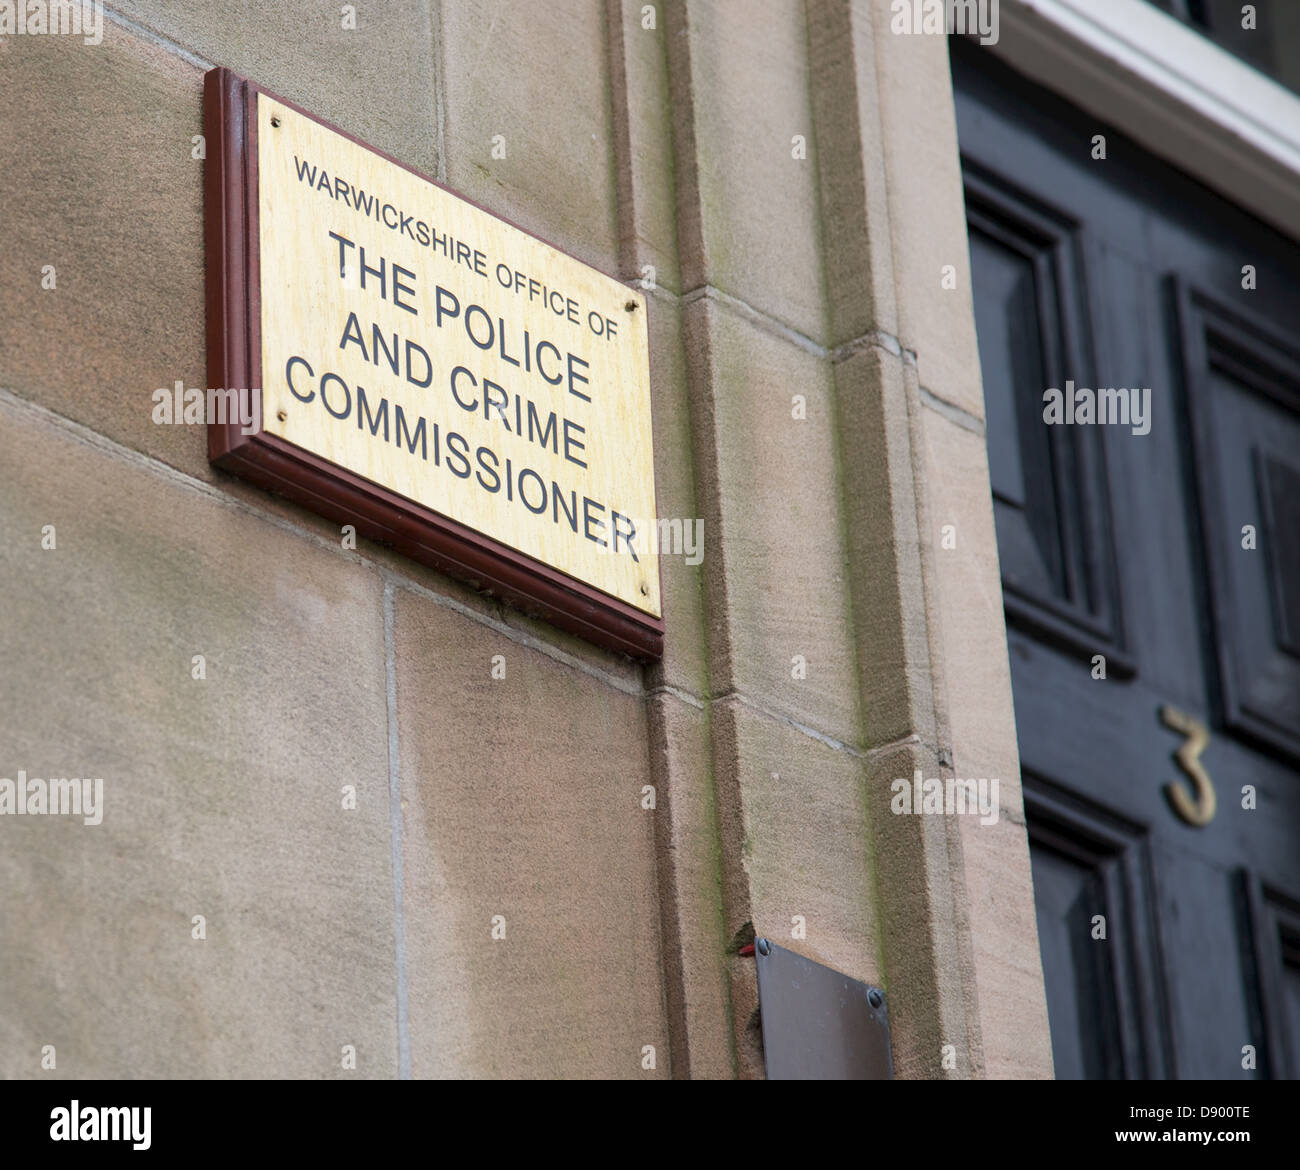 Warwickshire office of the Police and Crime Commissioner Stock Photo